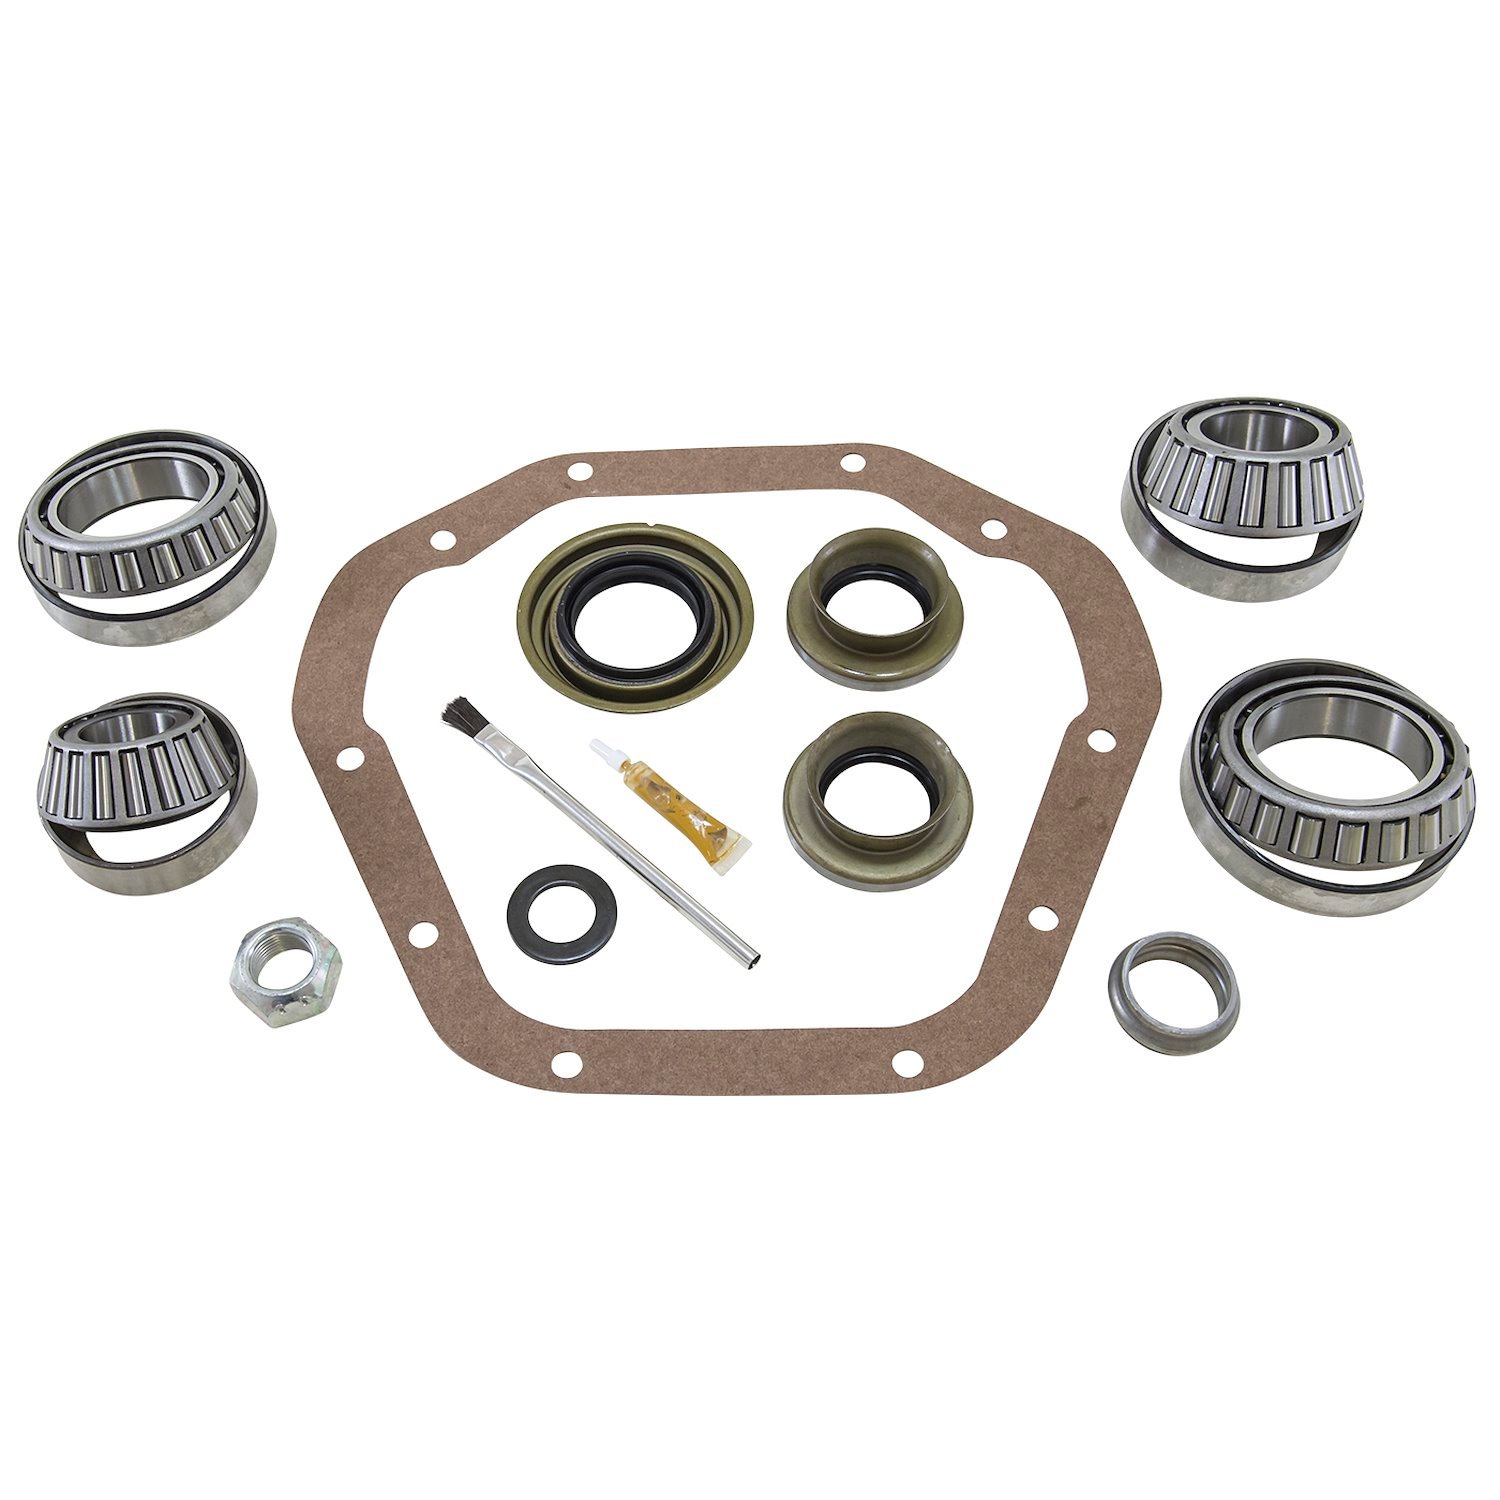 Bearing Installation Kit For Dana 60 Super Front Differential